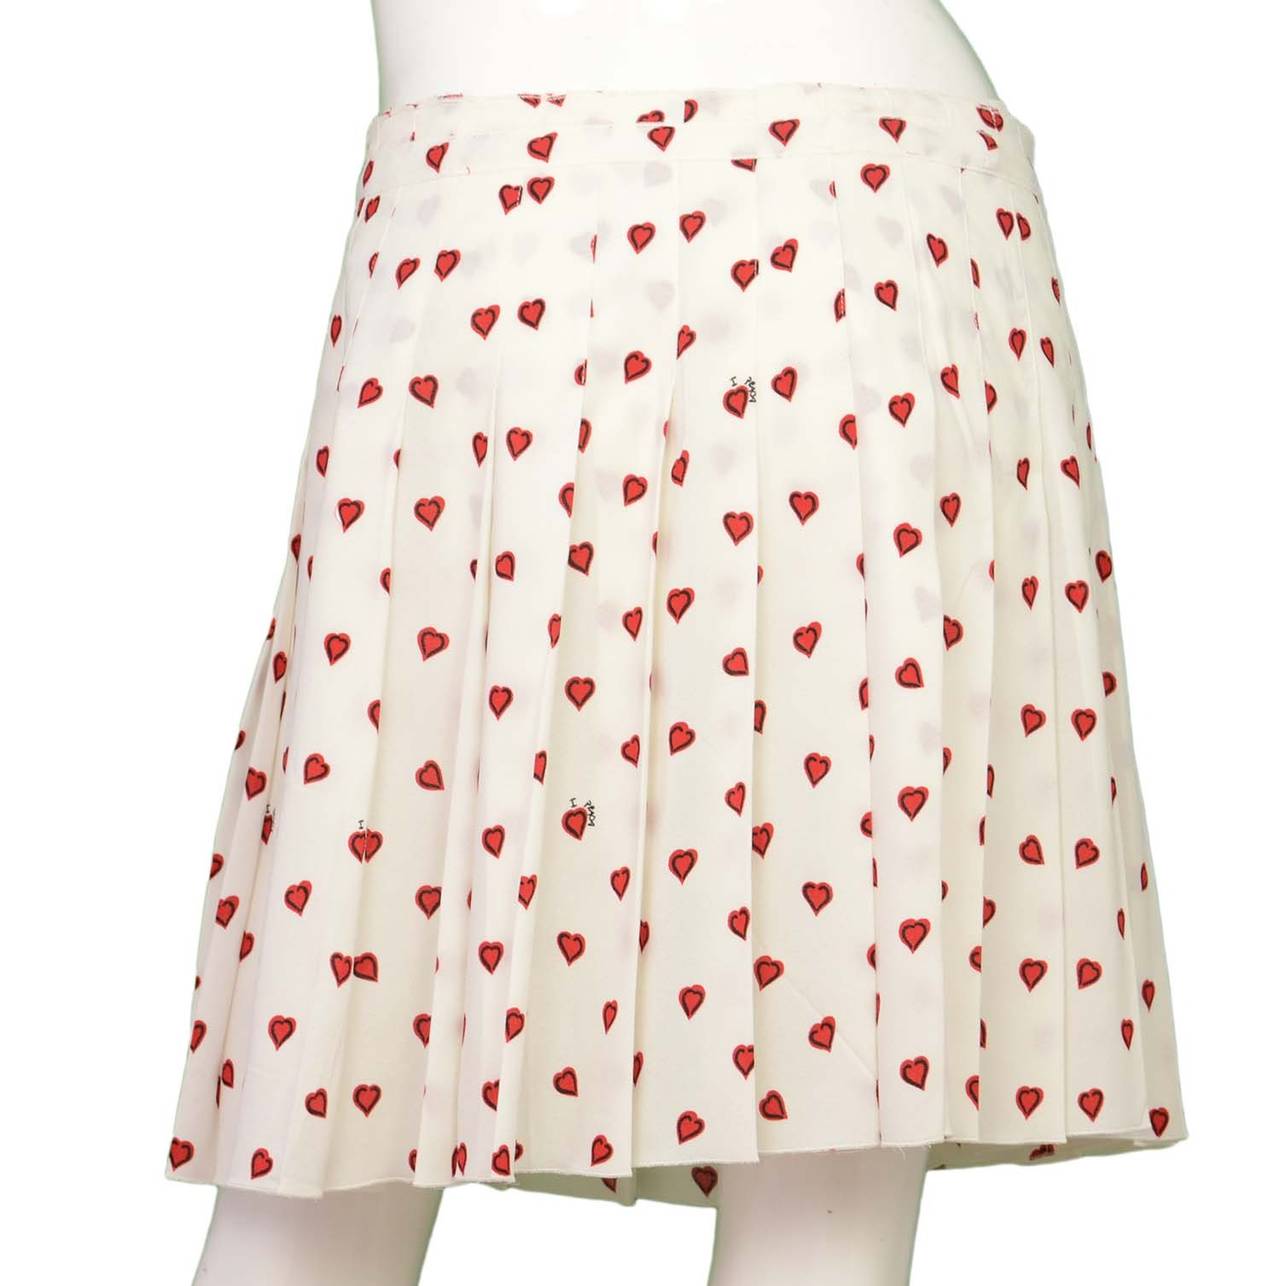 white and red heart skirt